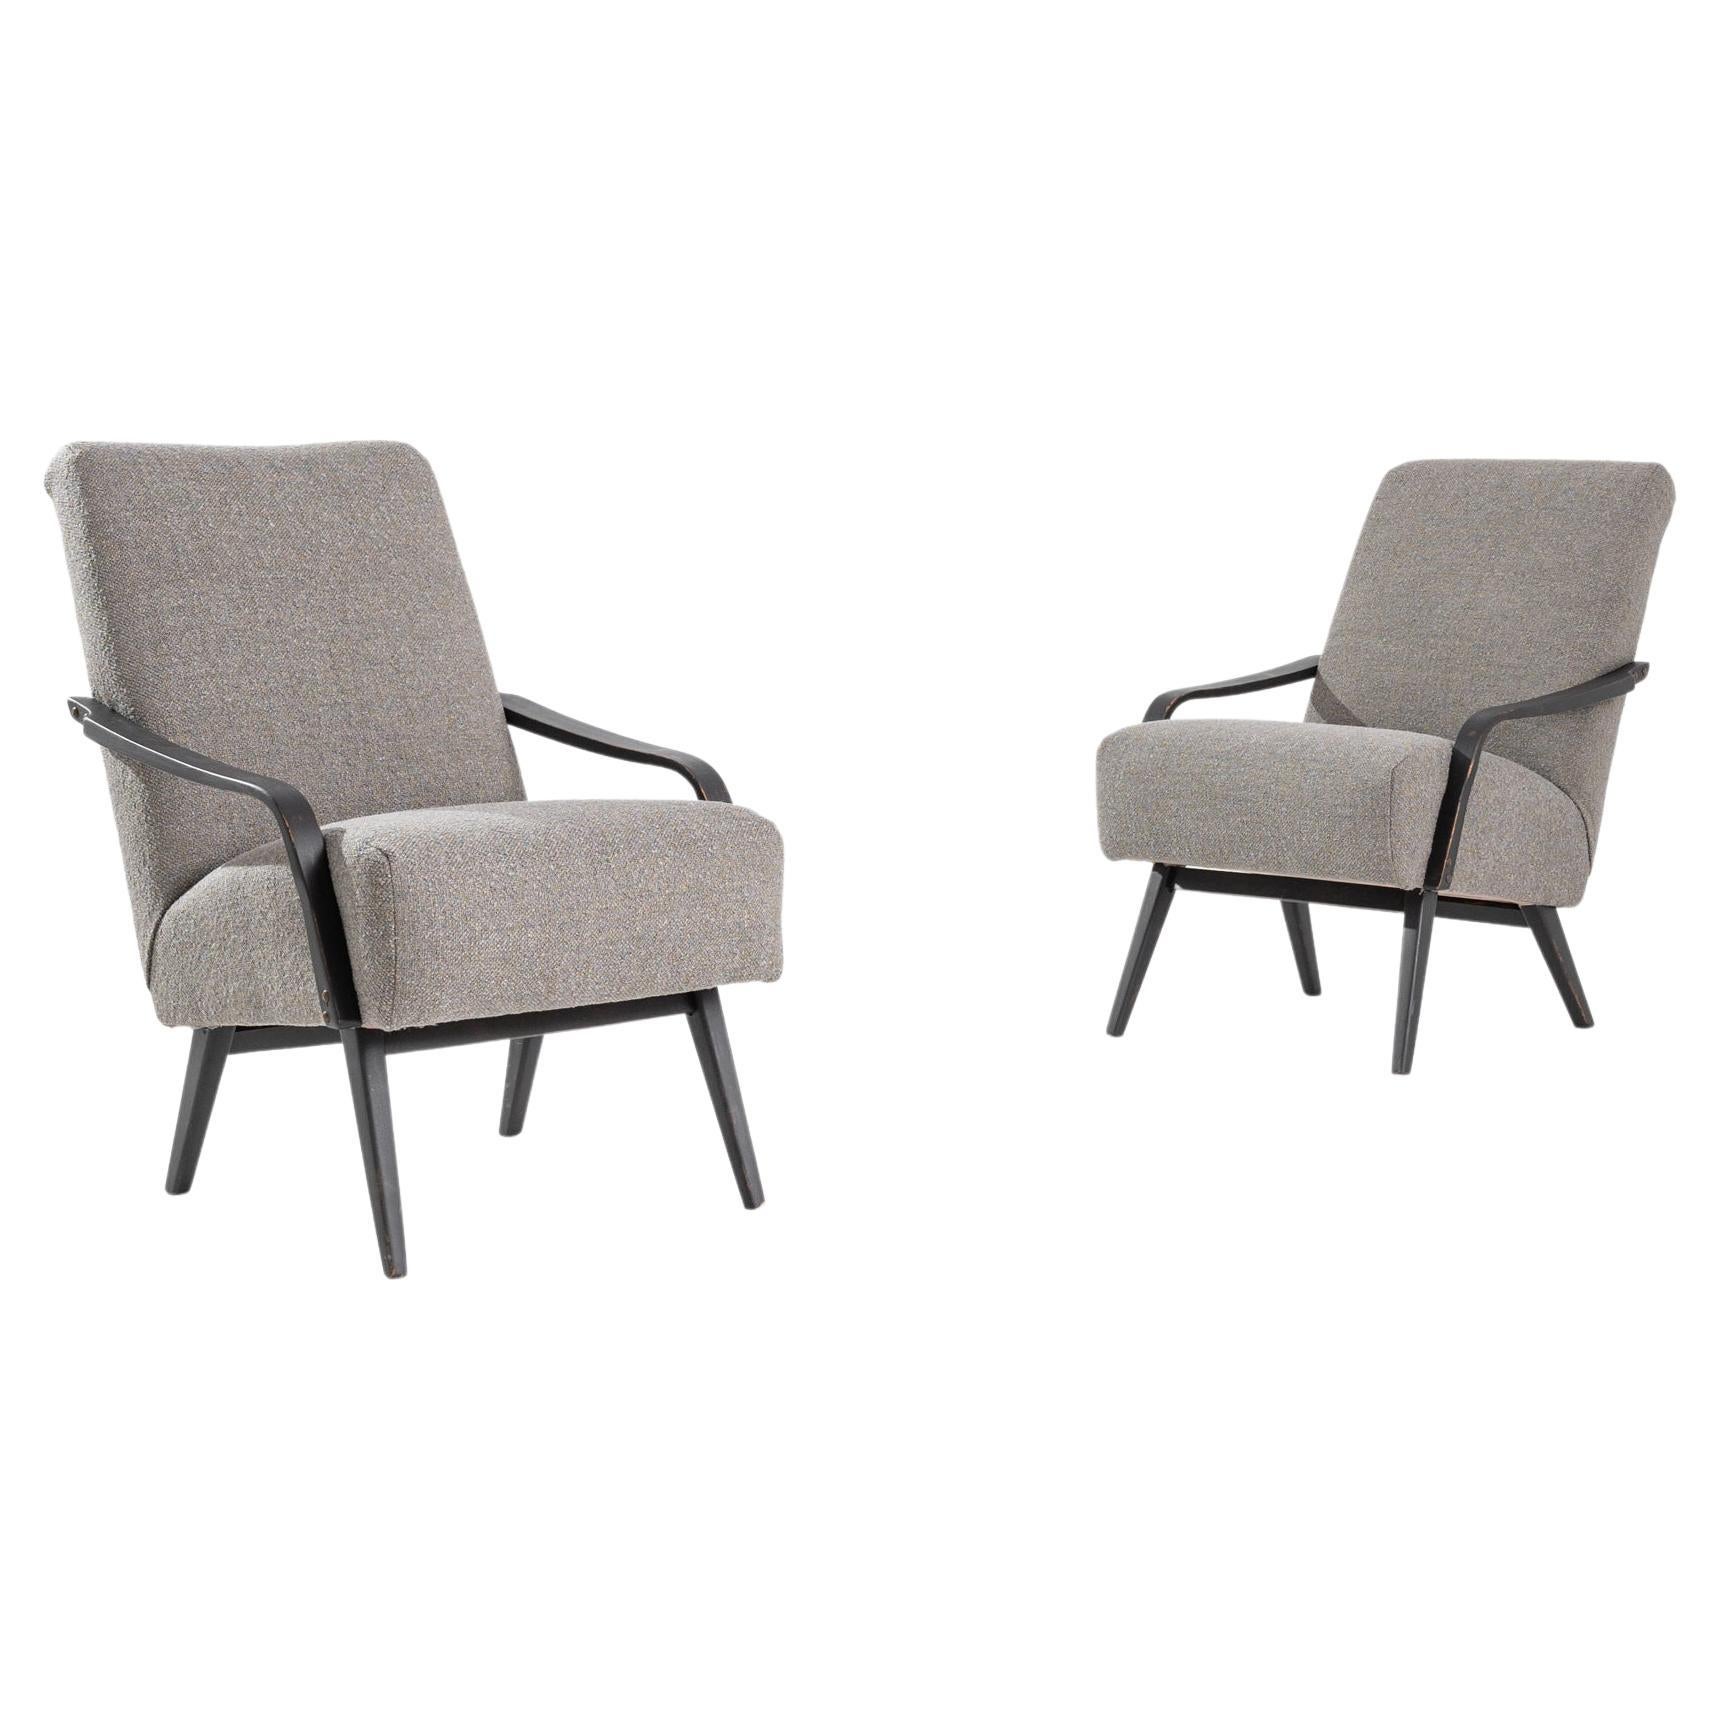 20th Century Armchairs by J. Smidek, a Pair For Sale